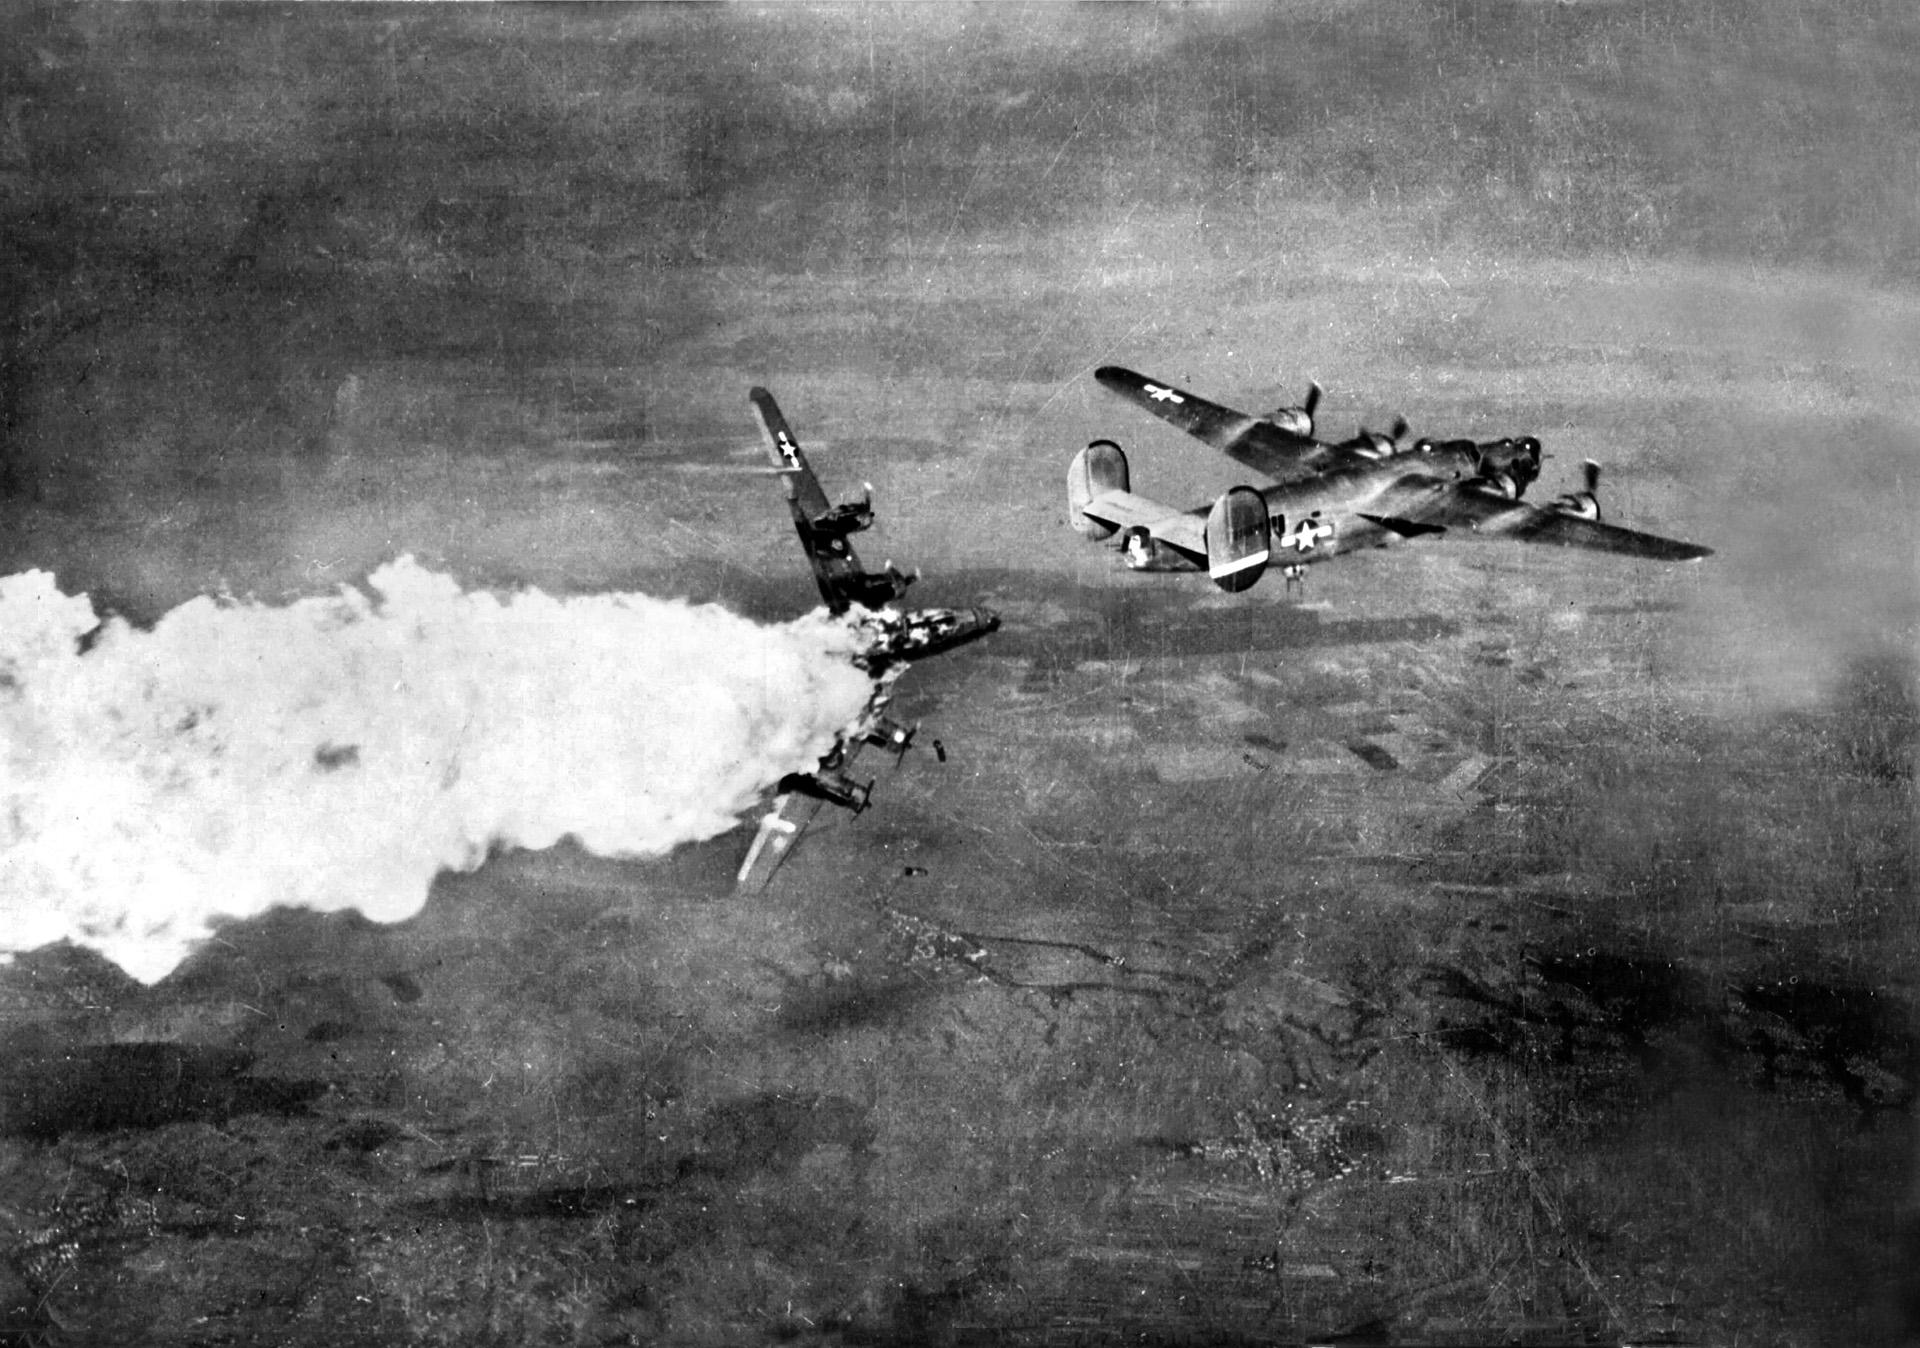 A Consolidated B-24 Liberator heavy bomber of the U.S. Army Air Forces disintegrates in a catastrophic explosion over Germany after a direct hit from flak batteries defending a target below. Senior American air commanders chose daylight bombing over the Royal Air Force’s preference for night raids, believing that accuracy would increase substantially. However, the tactic came at a tremendous cost.